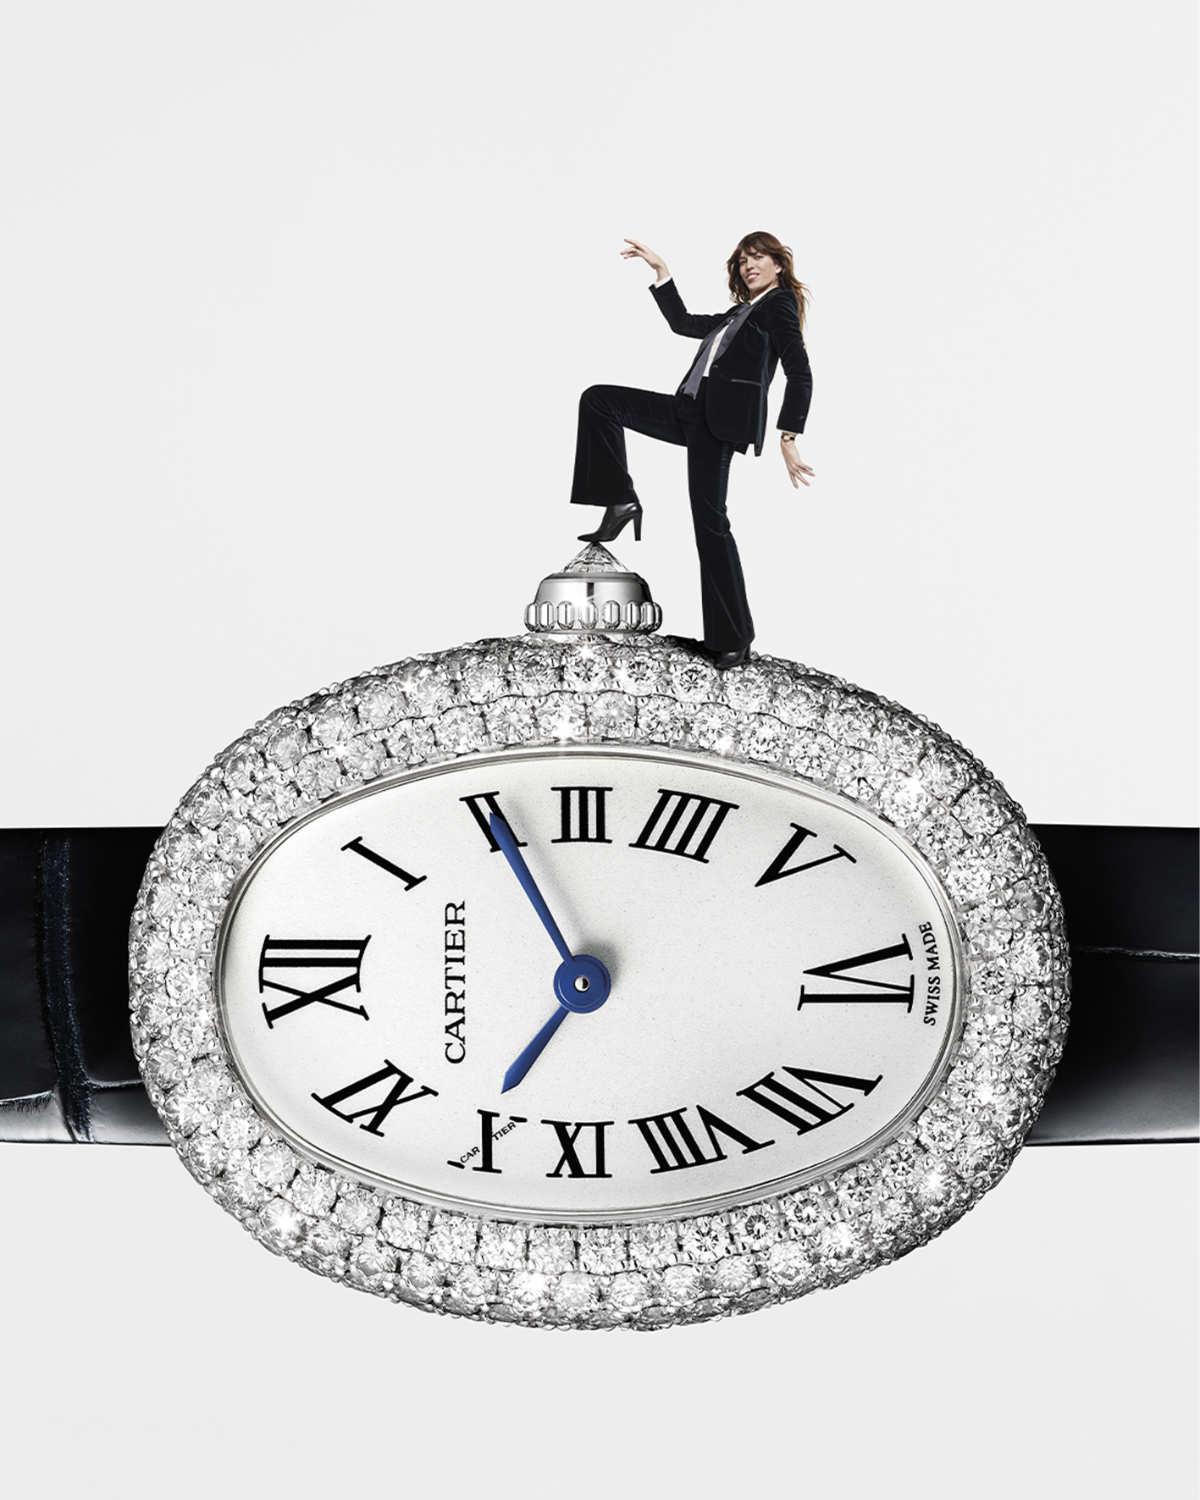 New Ratio Of Proportions Of Cartier's Iconic Baignoire Watch